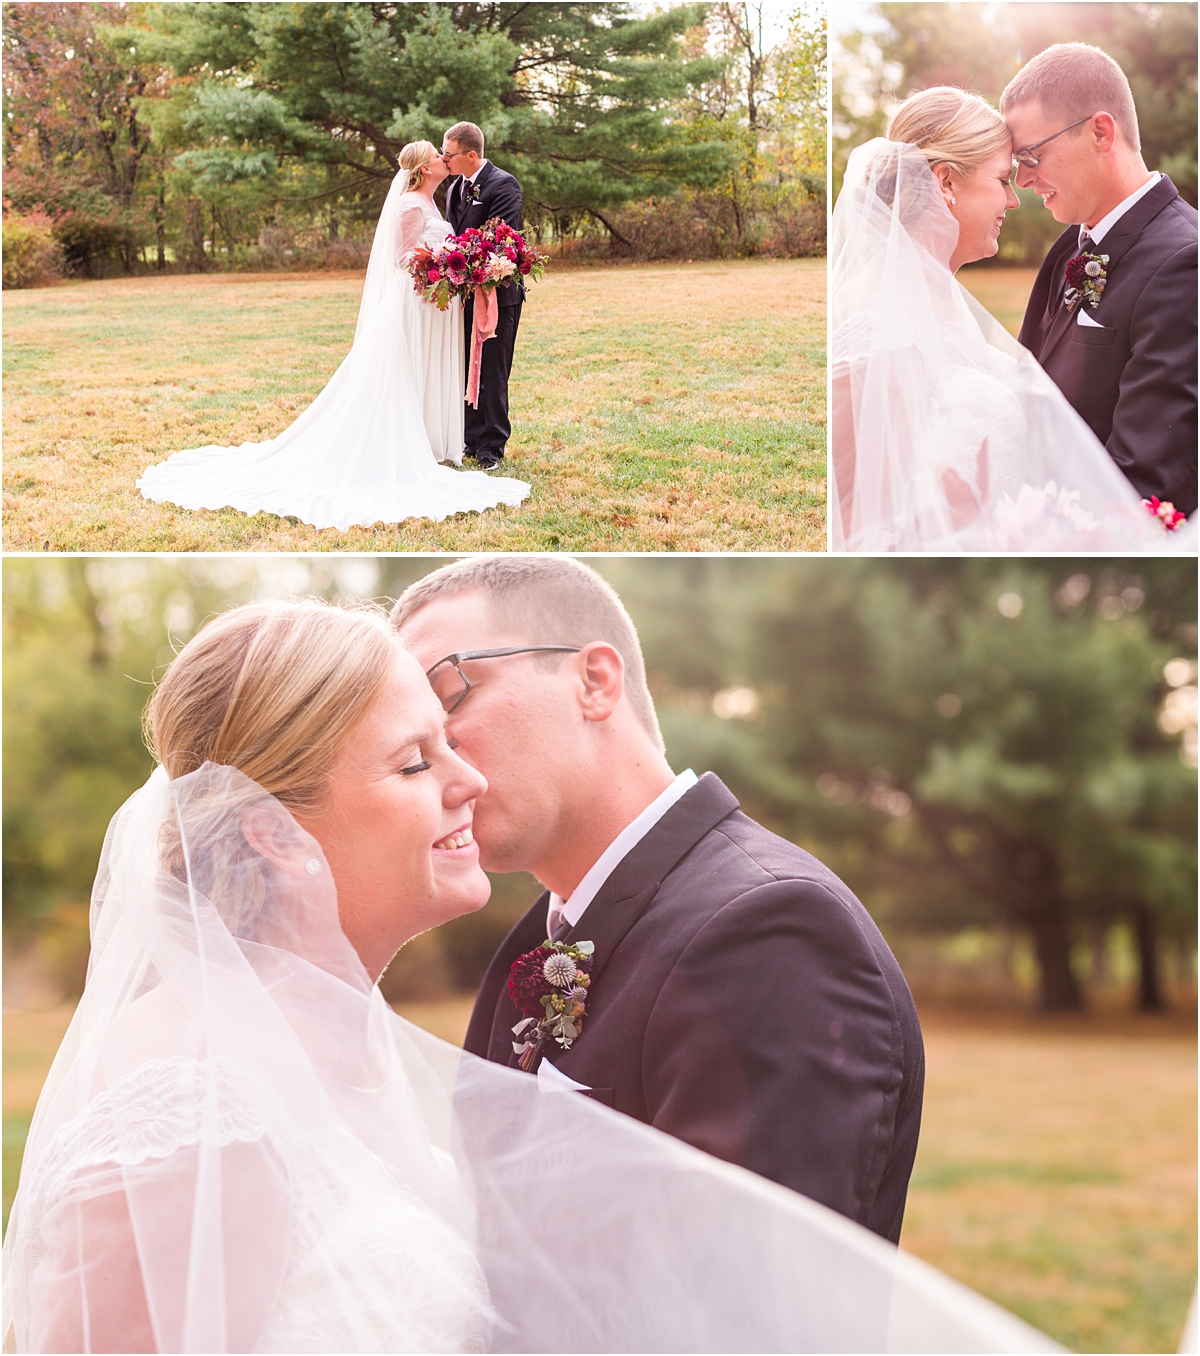 Waverly Mansion Wedding photographed by MD wedding photographer Alexandra Mandato Photography